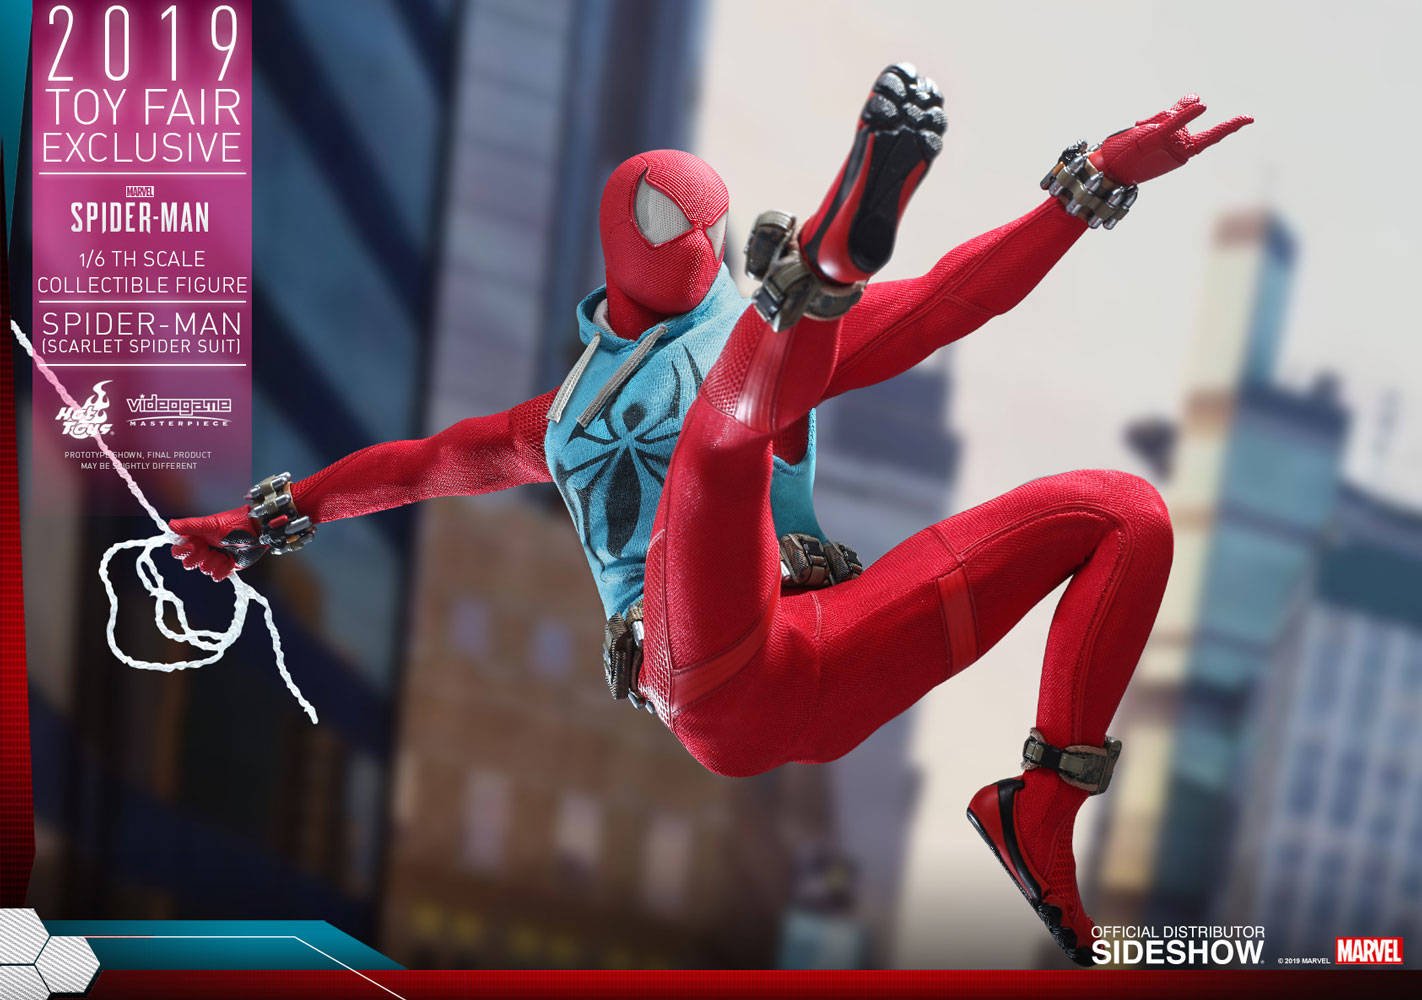 Immagine di Hot Toys presenta: Spider-Man (Scarlet Spider Suit) Sixth Scale Figure